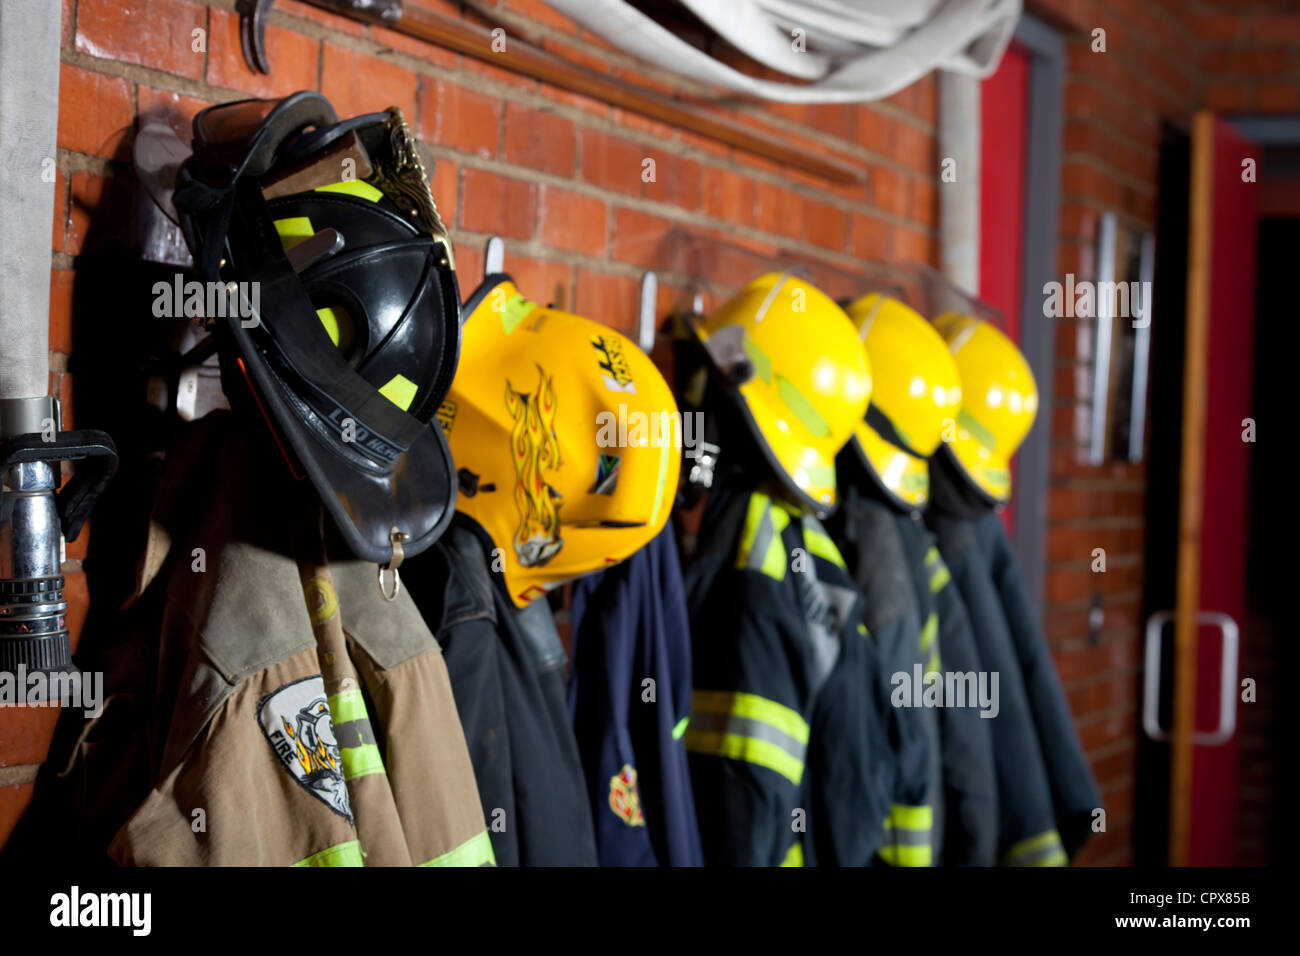 Firemen uniforms hanging up on a wall Stock Photo